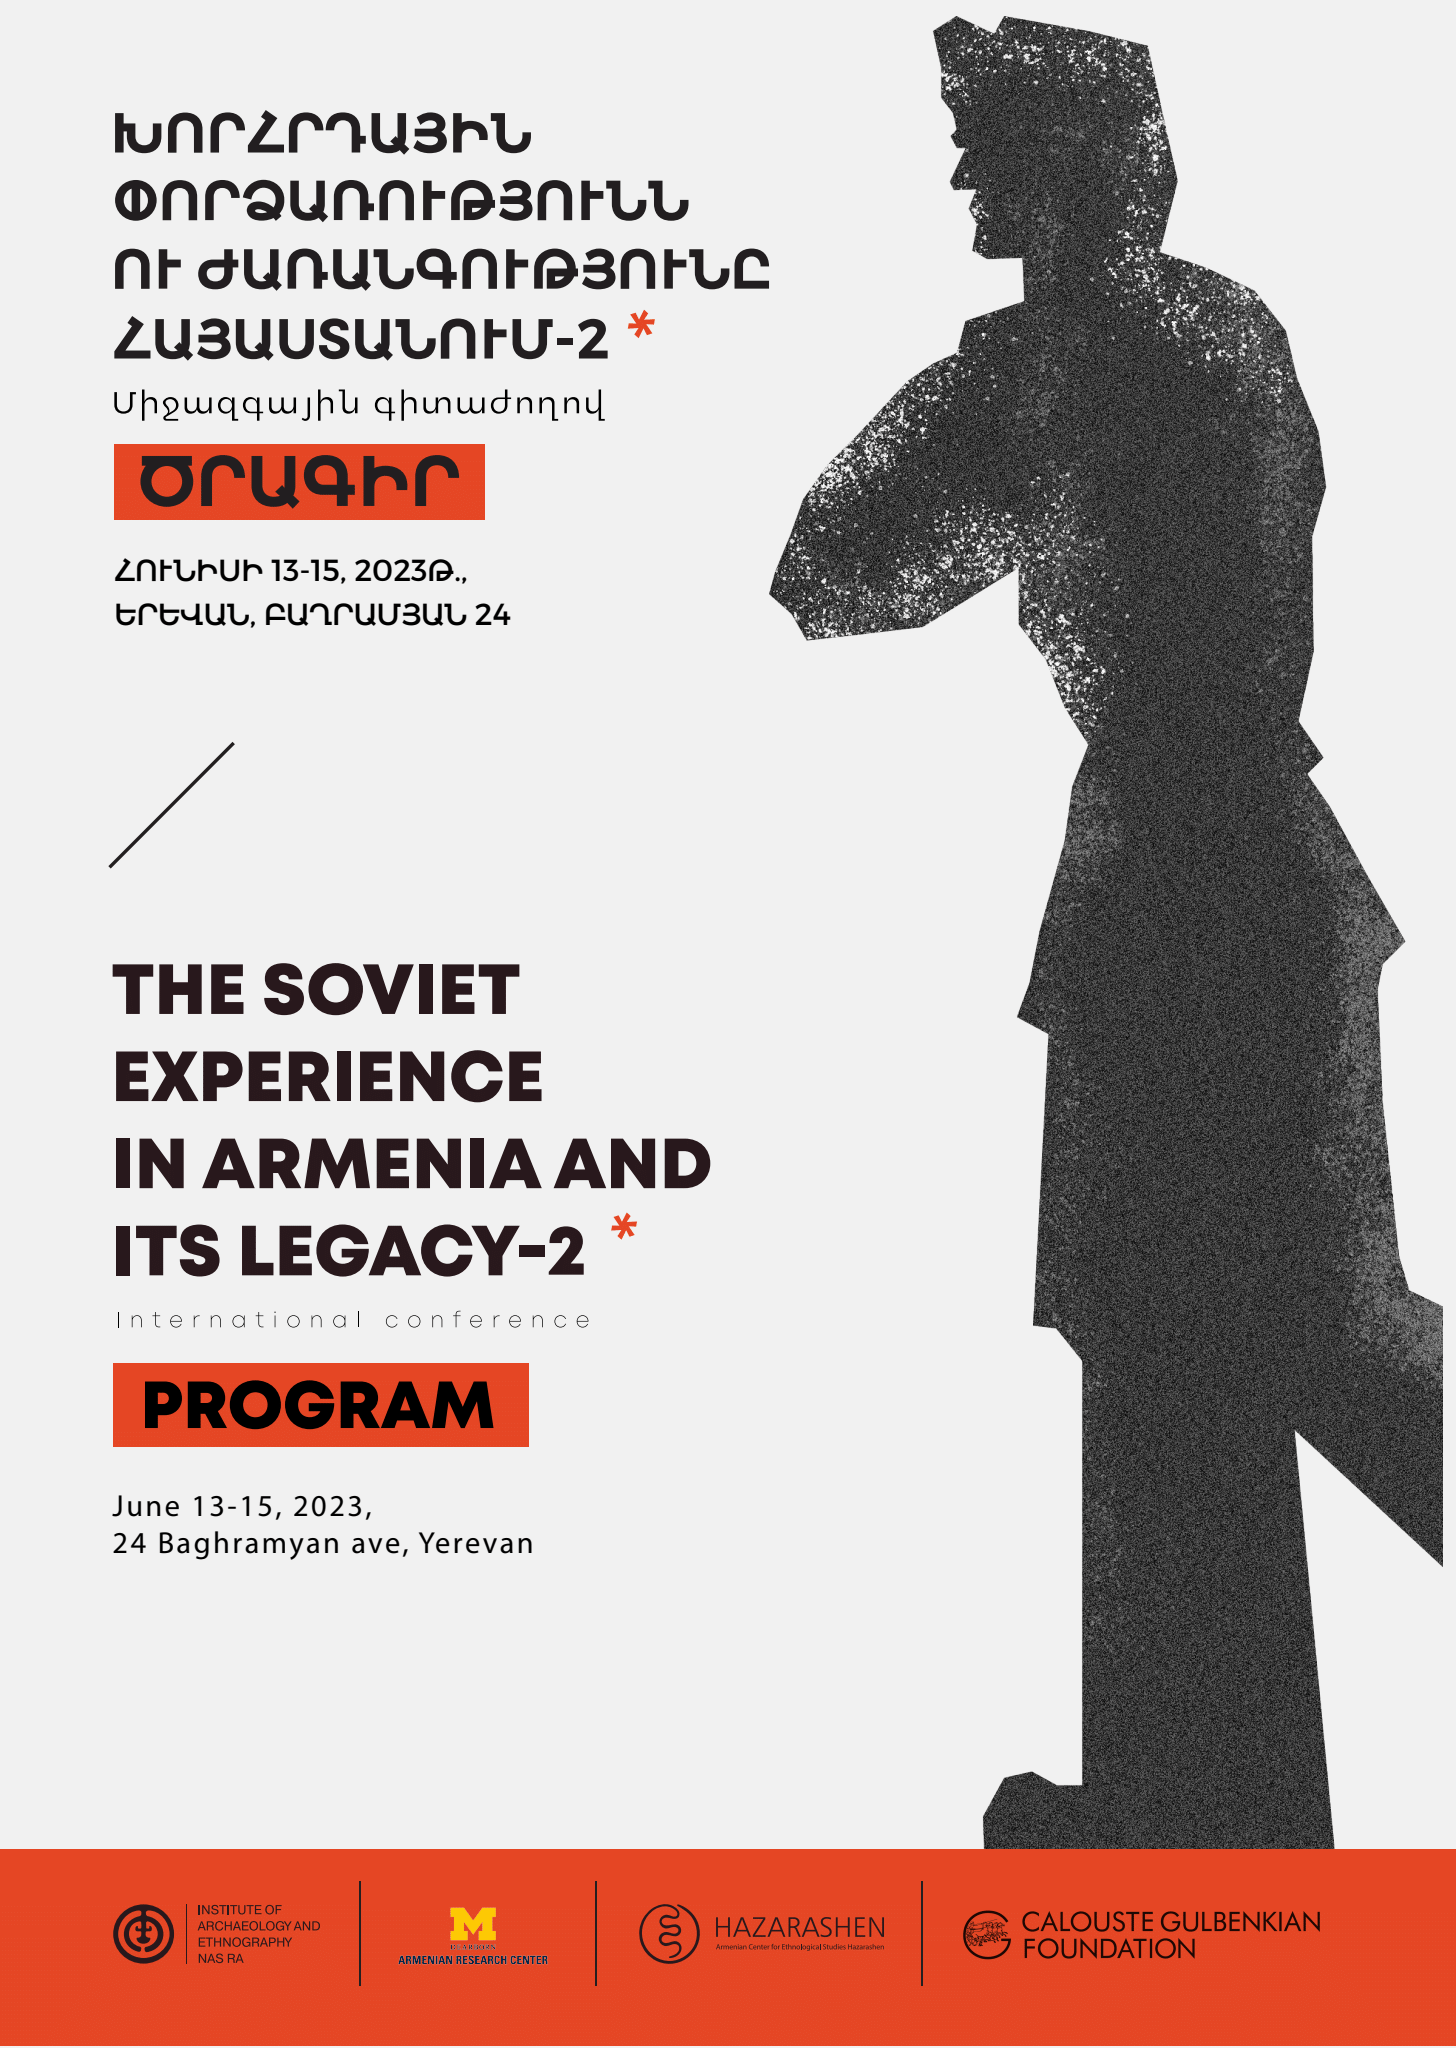 The Soviet Experience in Armenia and its Legacy